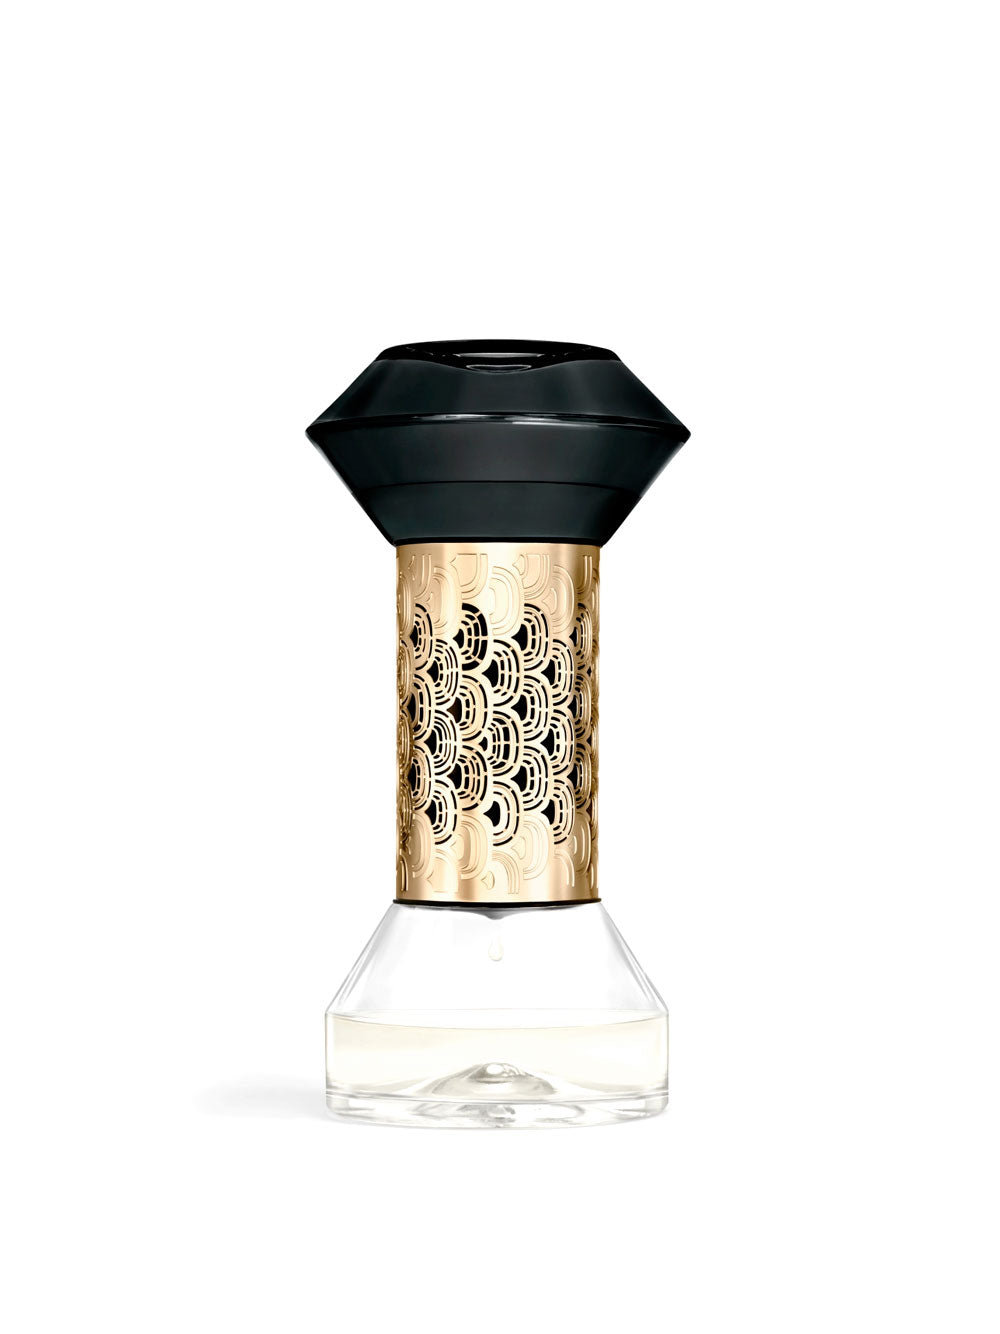 Baies Hourglass diffuser